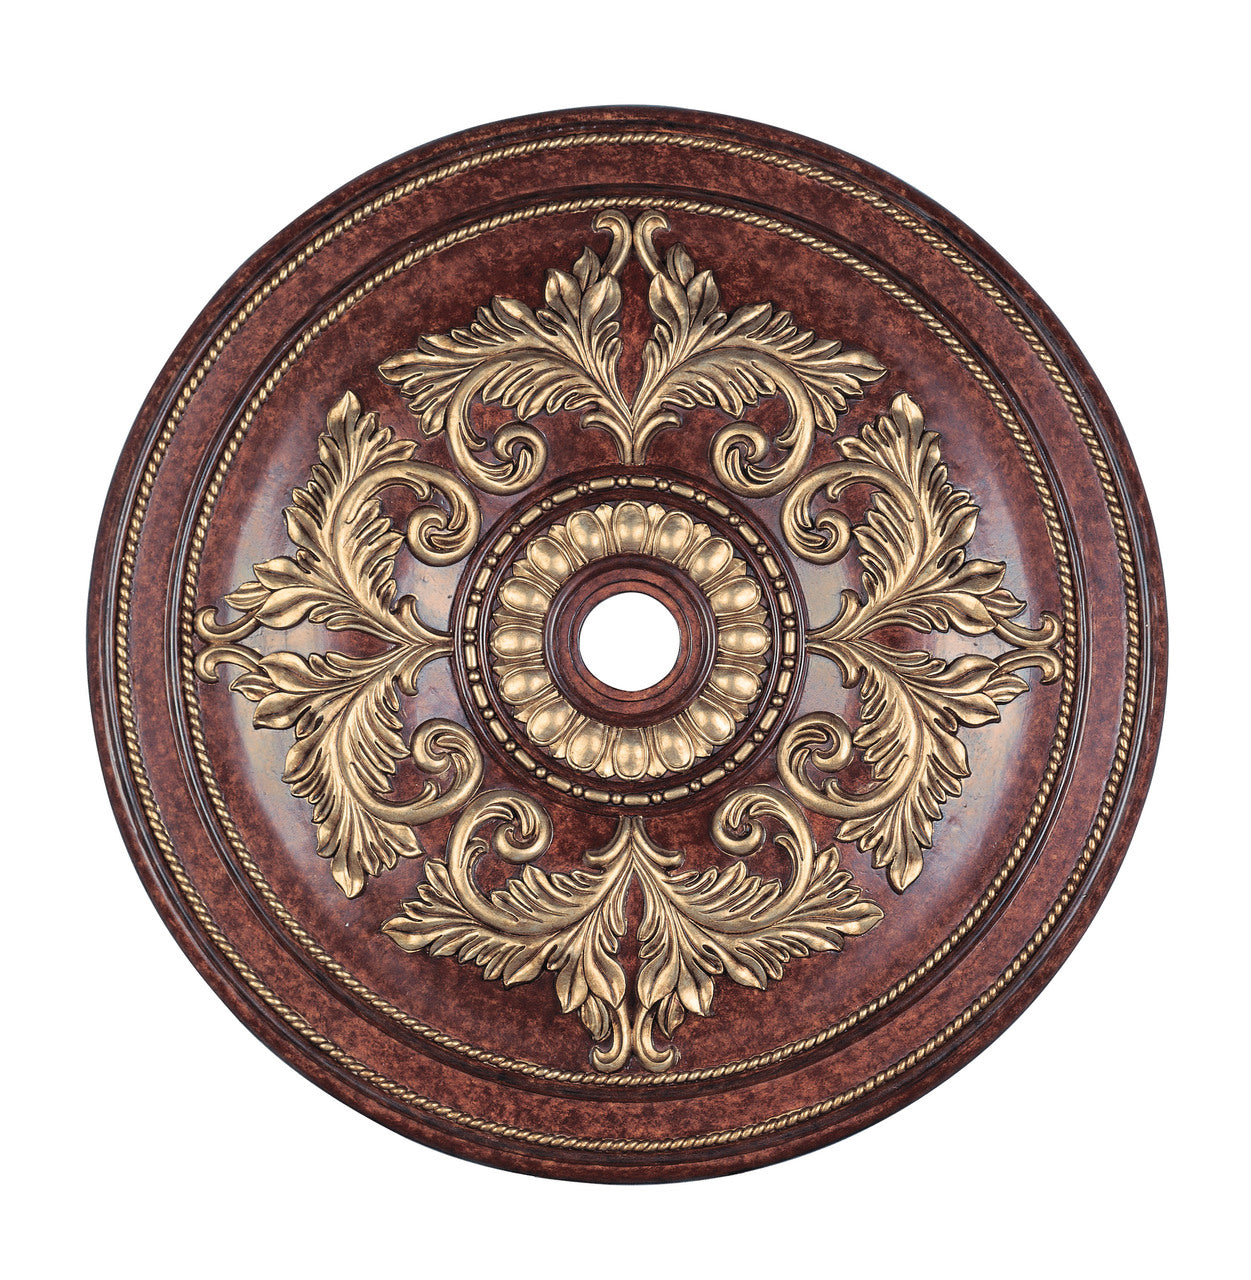 LIVEX Lighting 8228-63 Ceiling Medallion in Verona Bronze with Aged Gold Leaf Accents